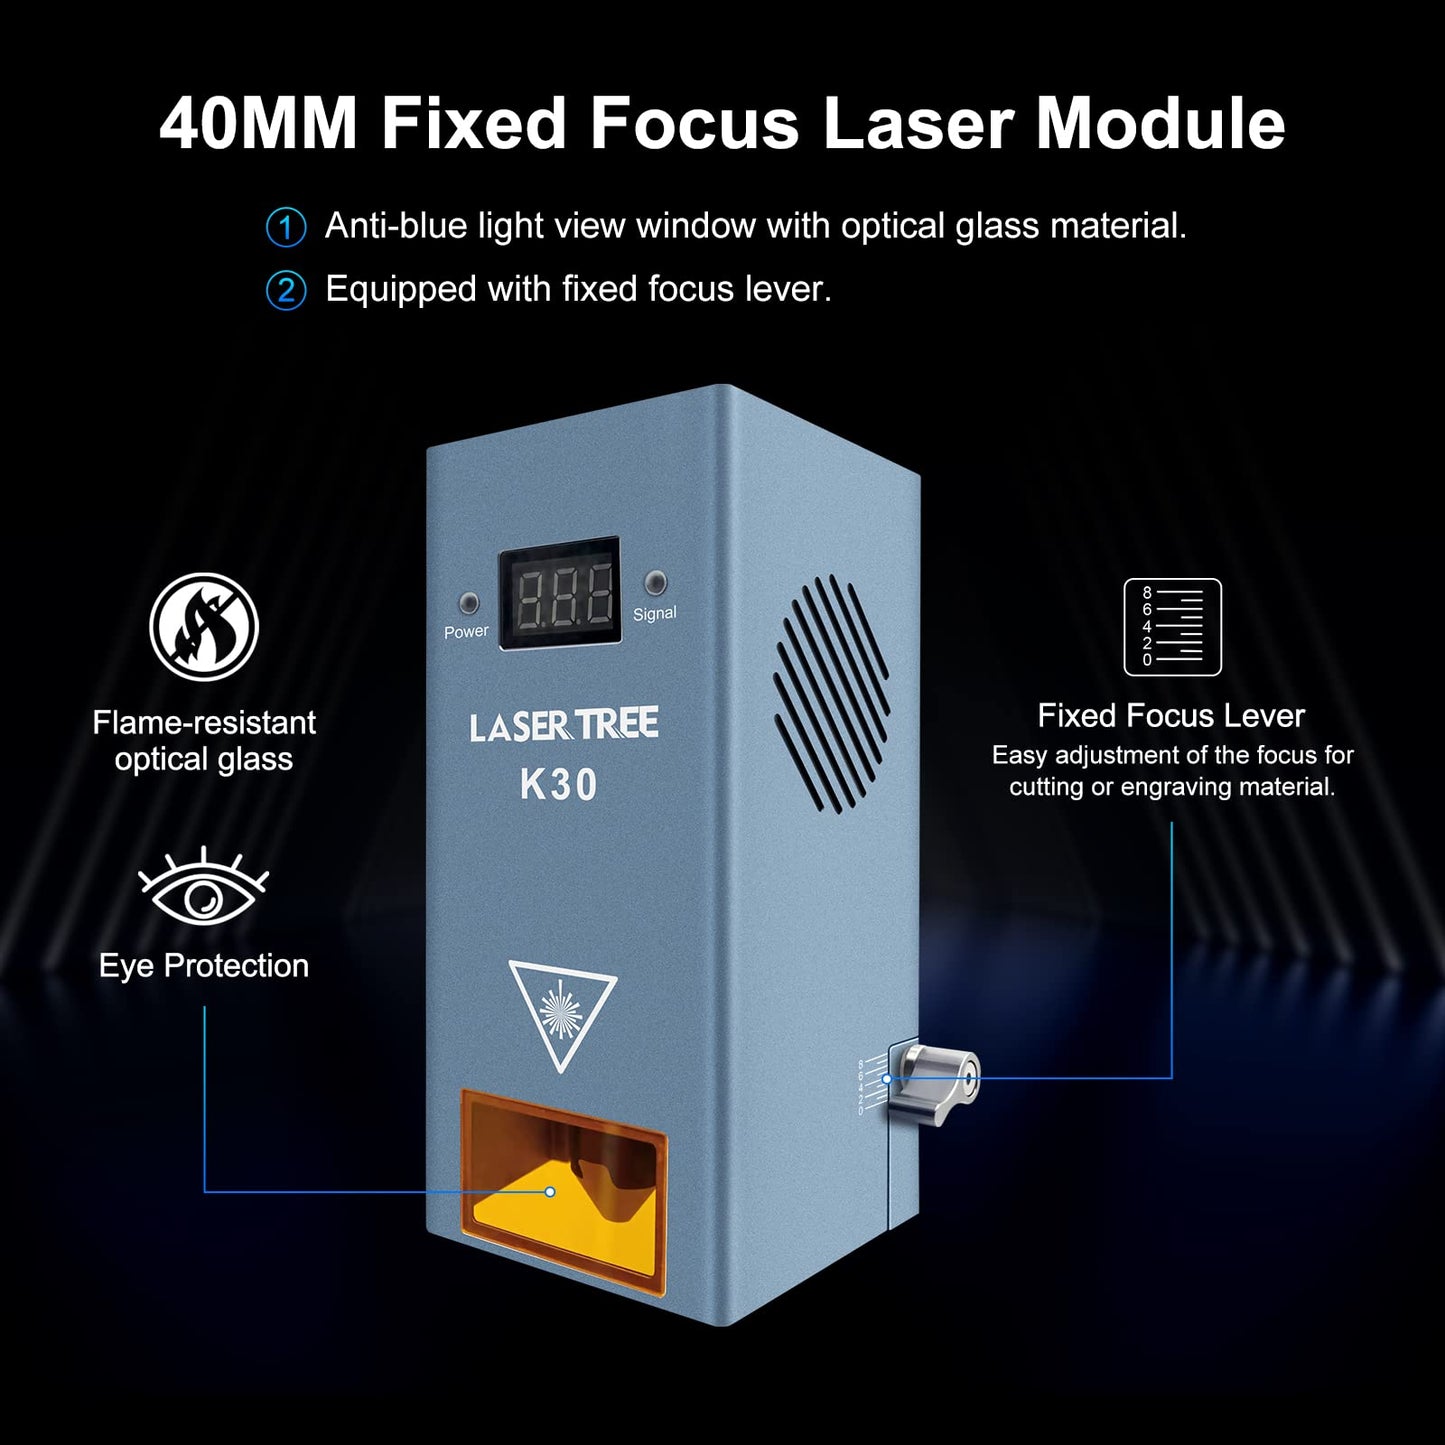 LASER TREE K30 Laser Module, 30W Optical Output Laser Cutter Module, Higher Accuracy Laser Engraving Module with Air Assisst, Laser Head for Laser